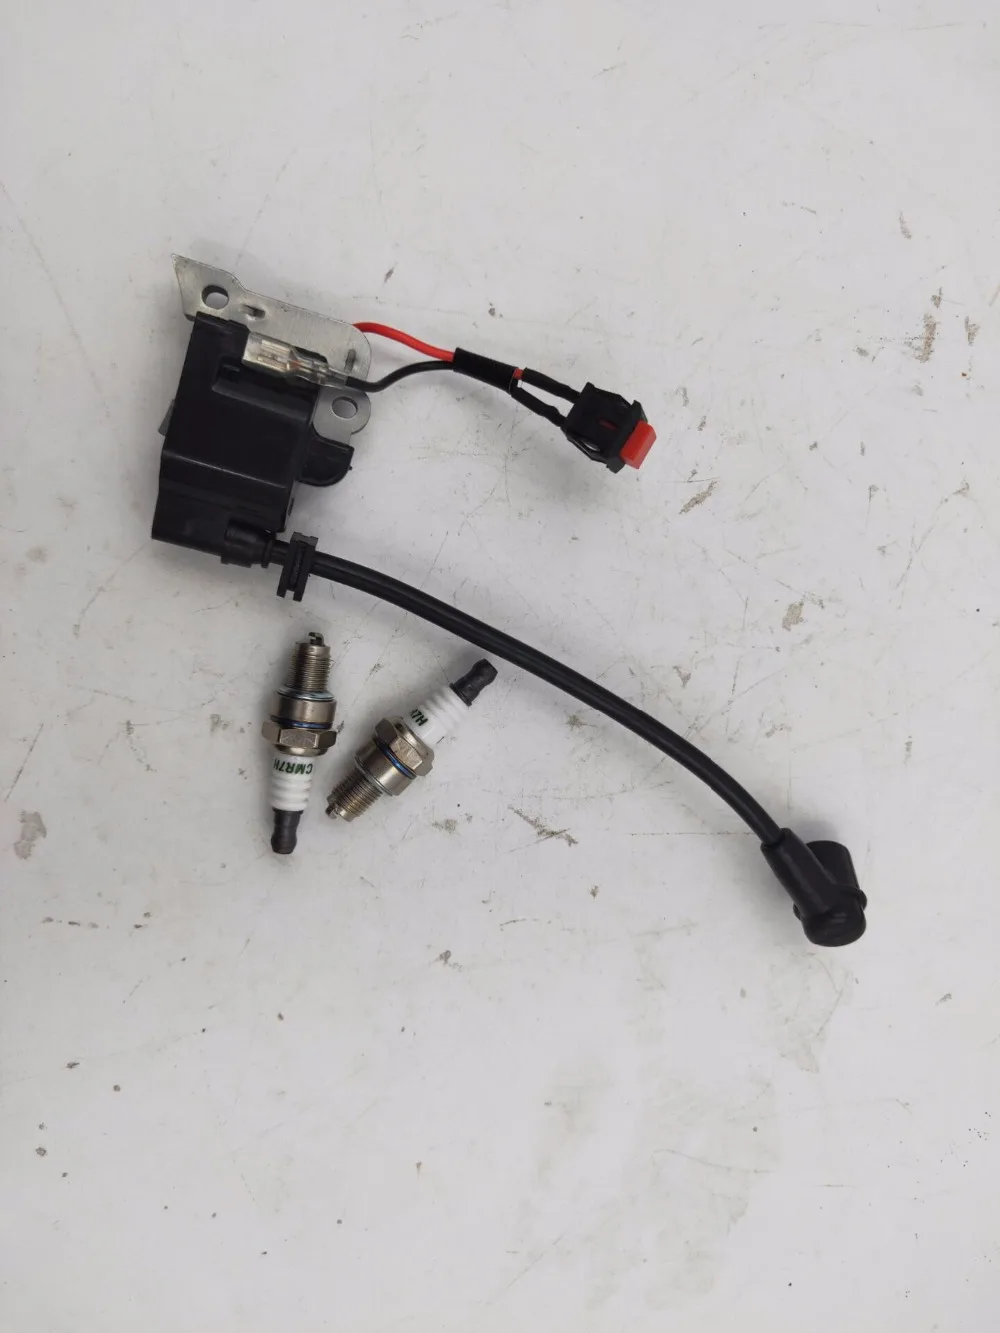 

Ignition Coil AND Spark Plug FOR Zenoah CY ROVAN ENGINES FOR HPI KM BAJA LOST PARTS